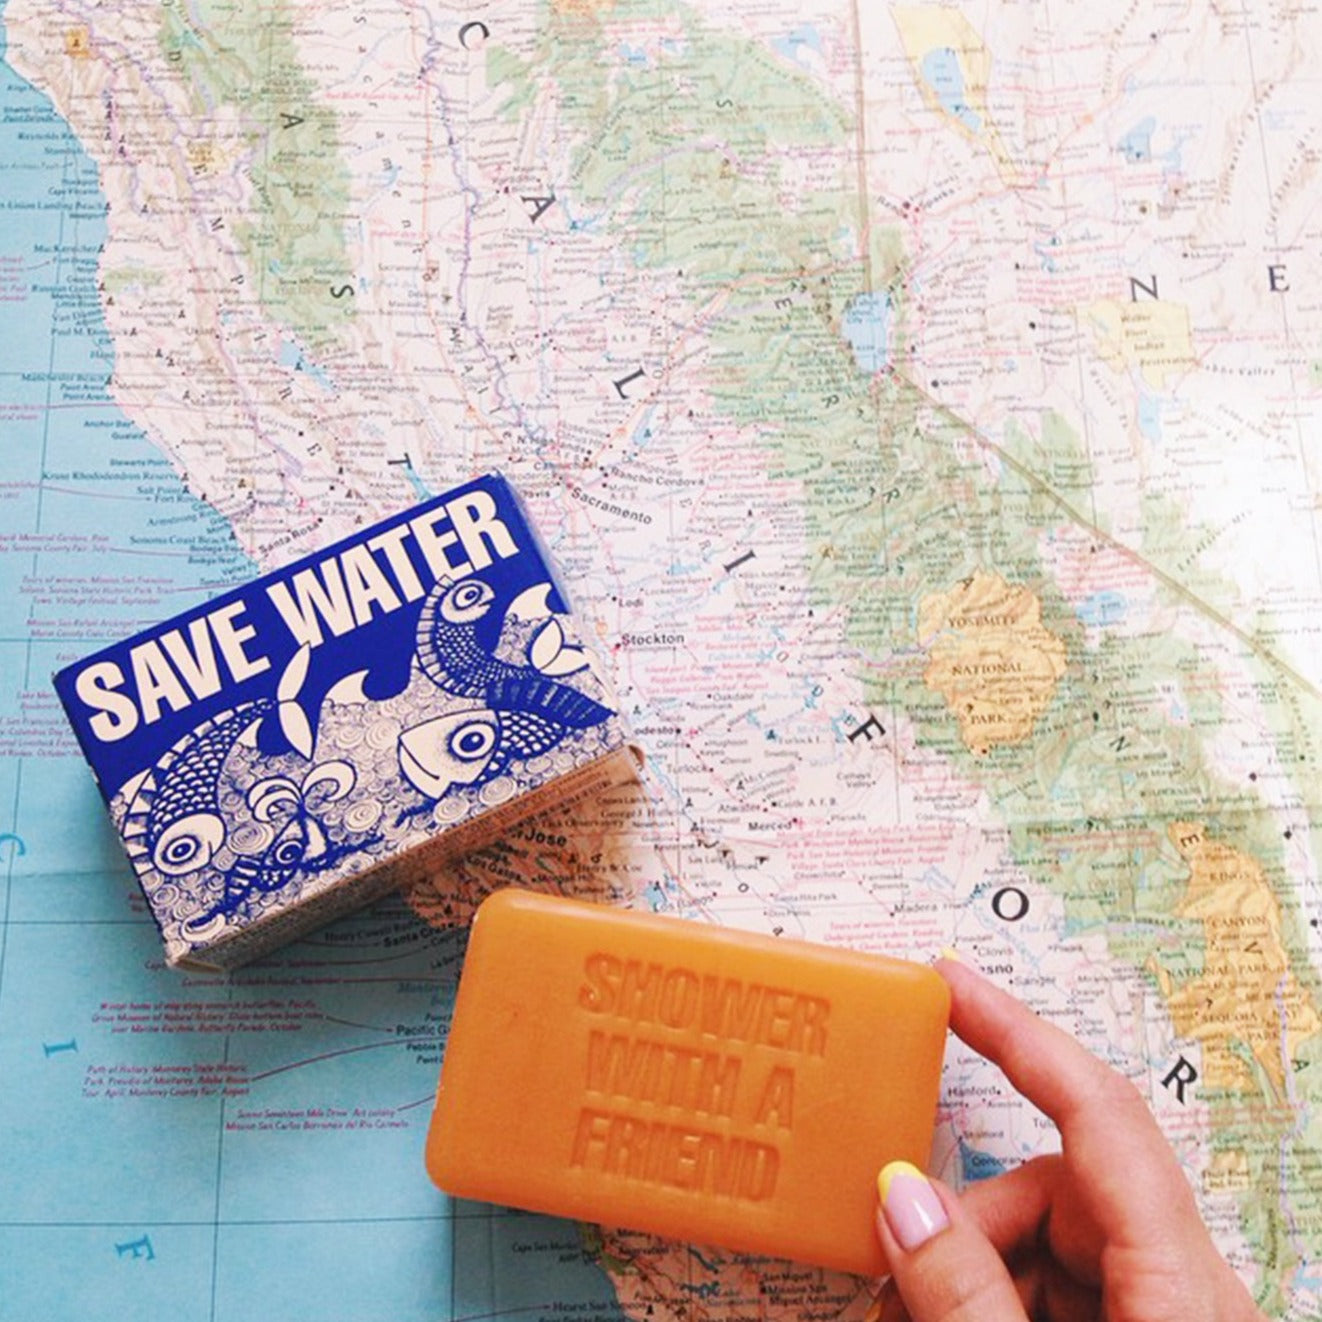 Kalastyle Save Water Soap - Shower With A Friend!